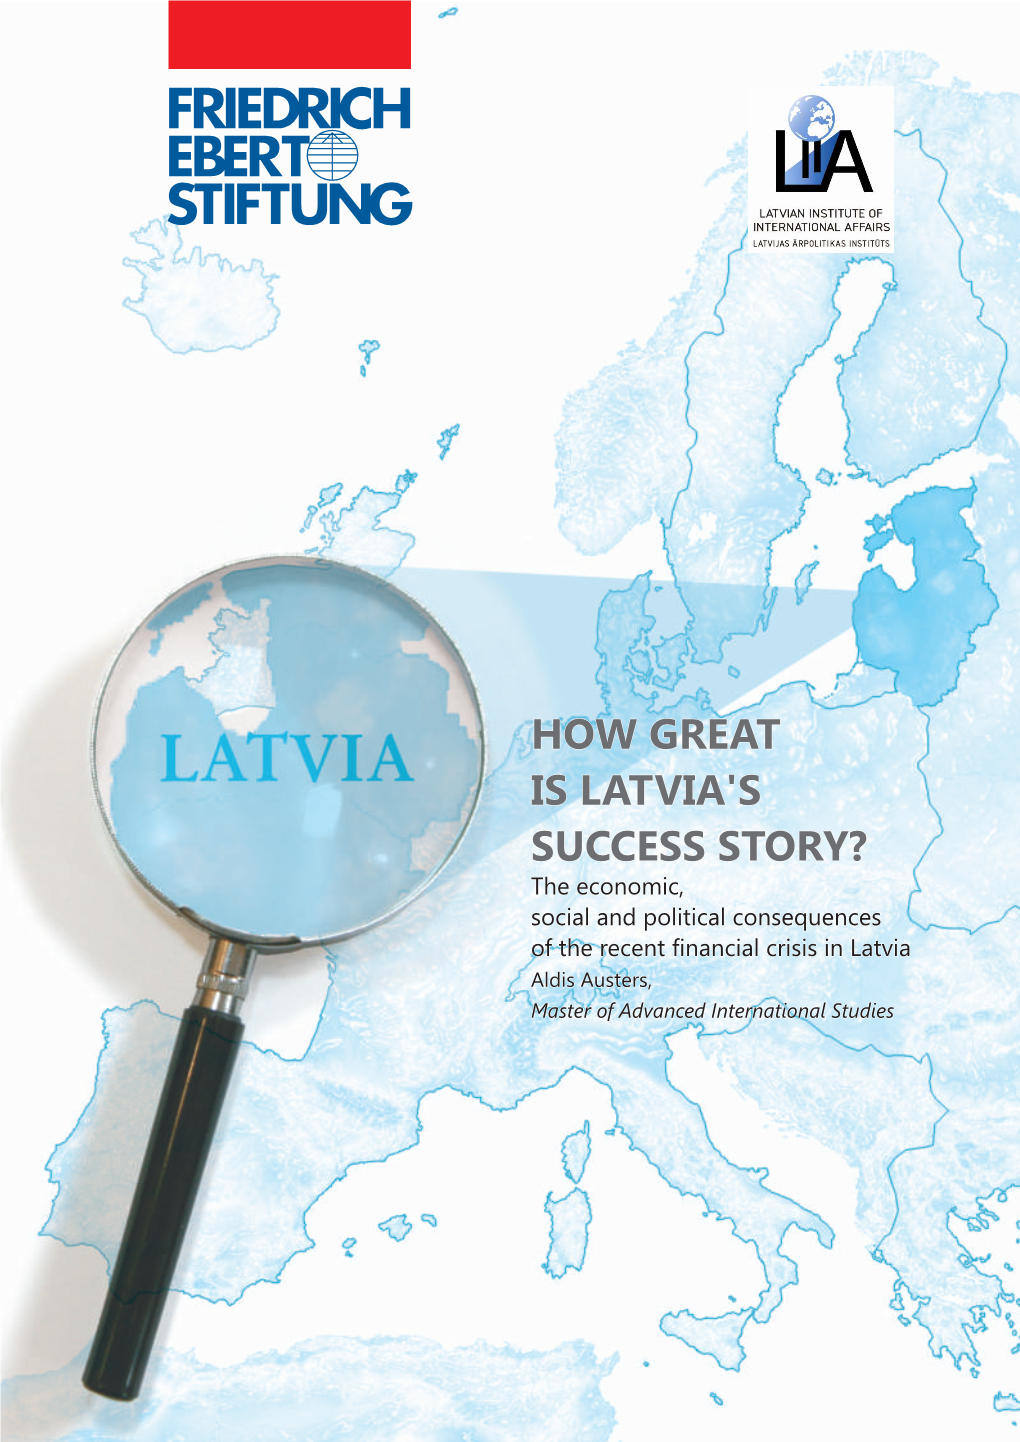 How Great Is Latvia's Success Story?